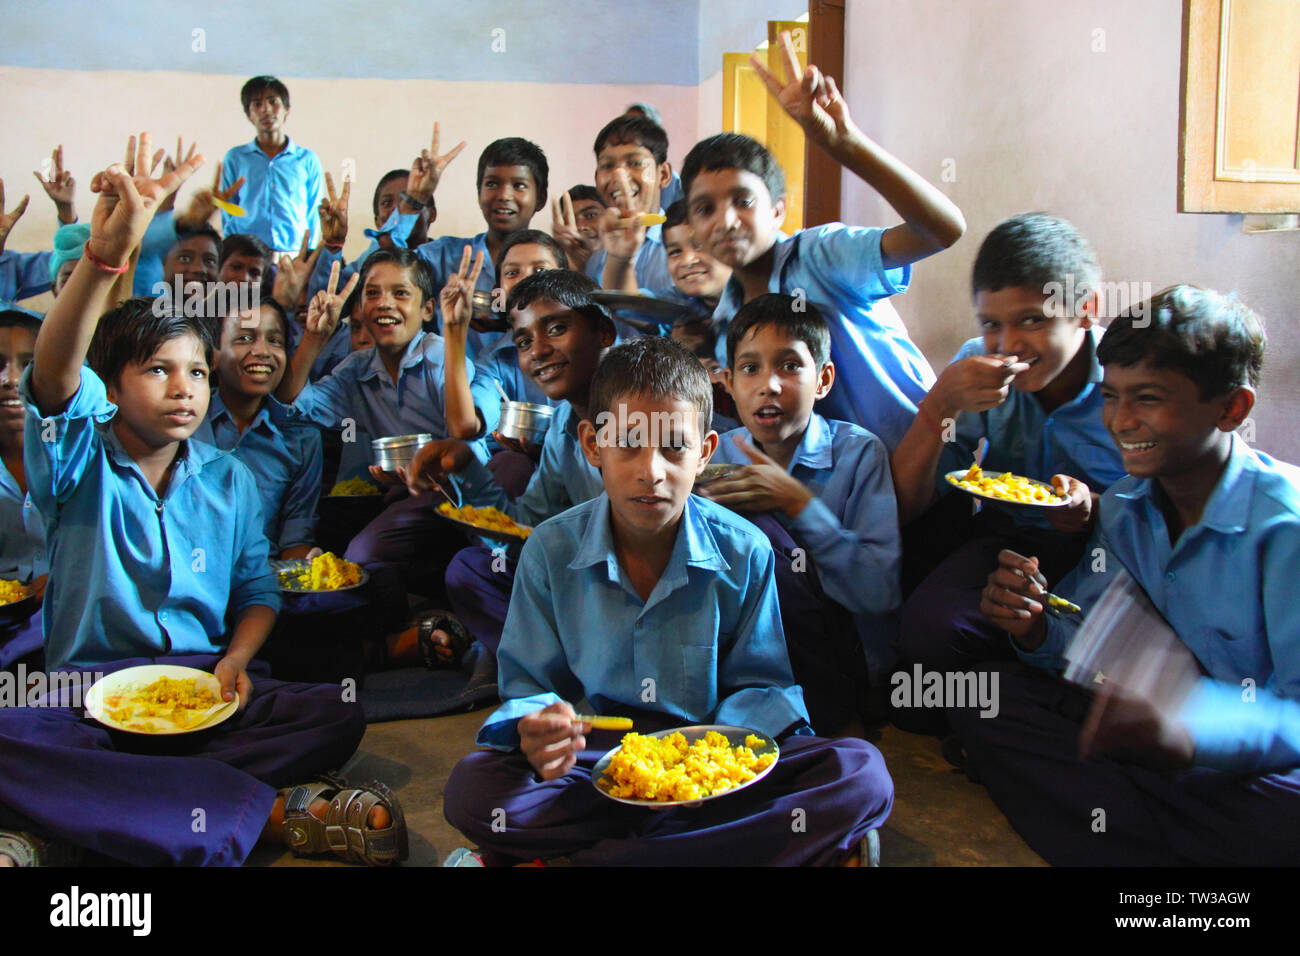 Students having mid day meal, India Stock Photo